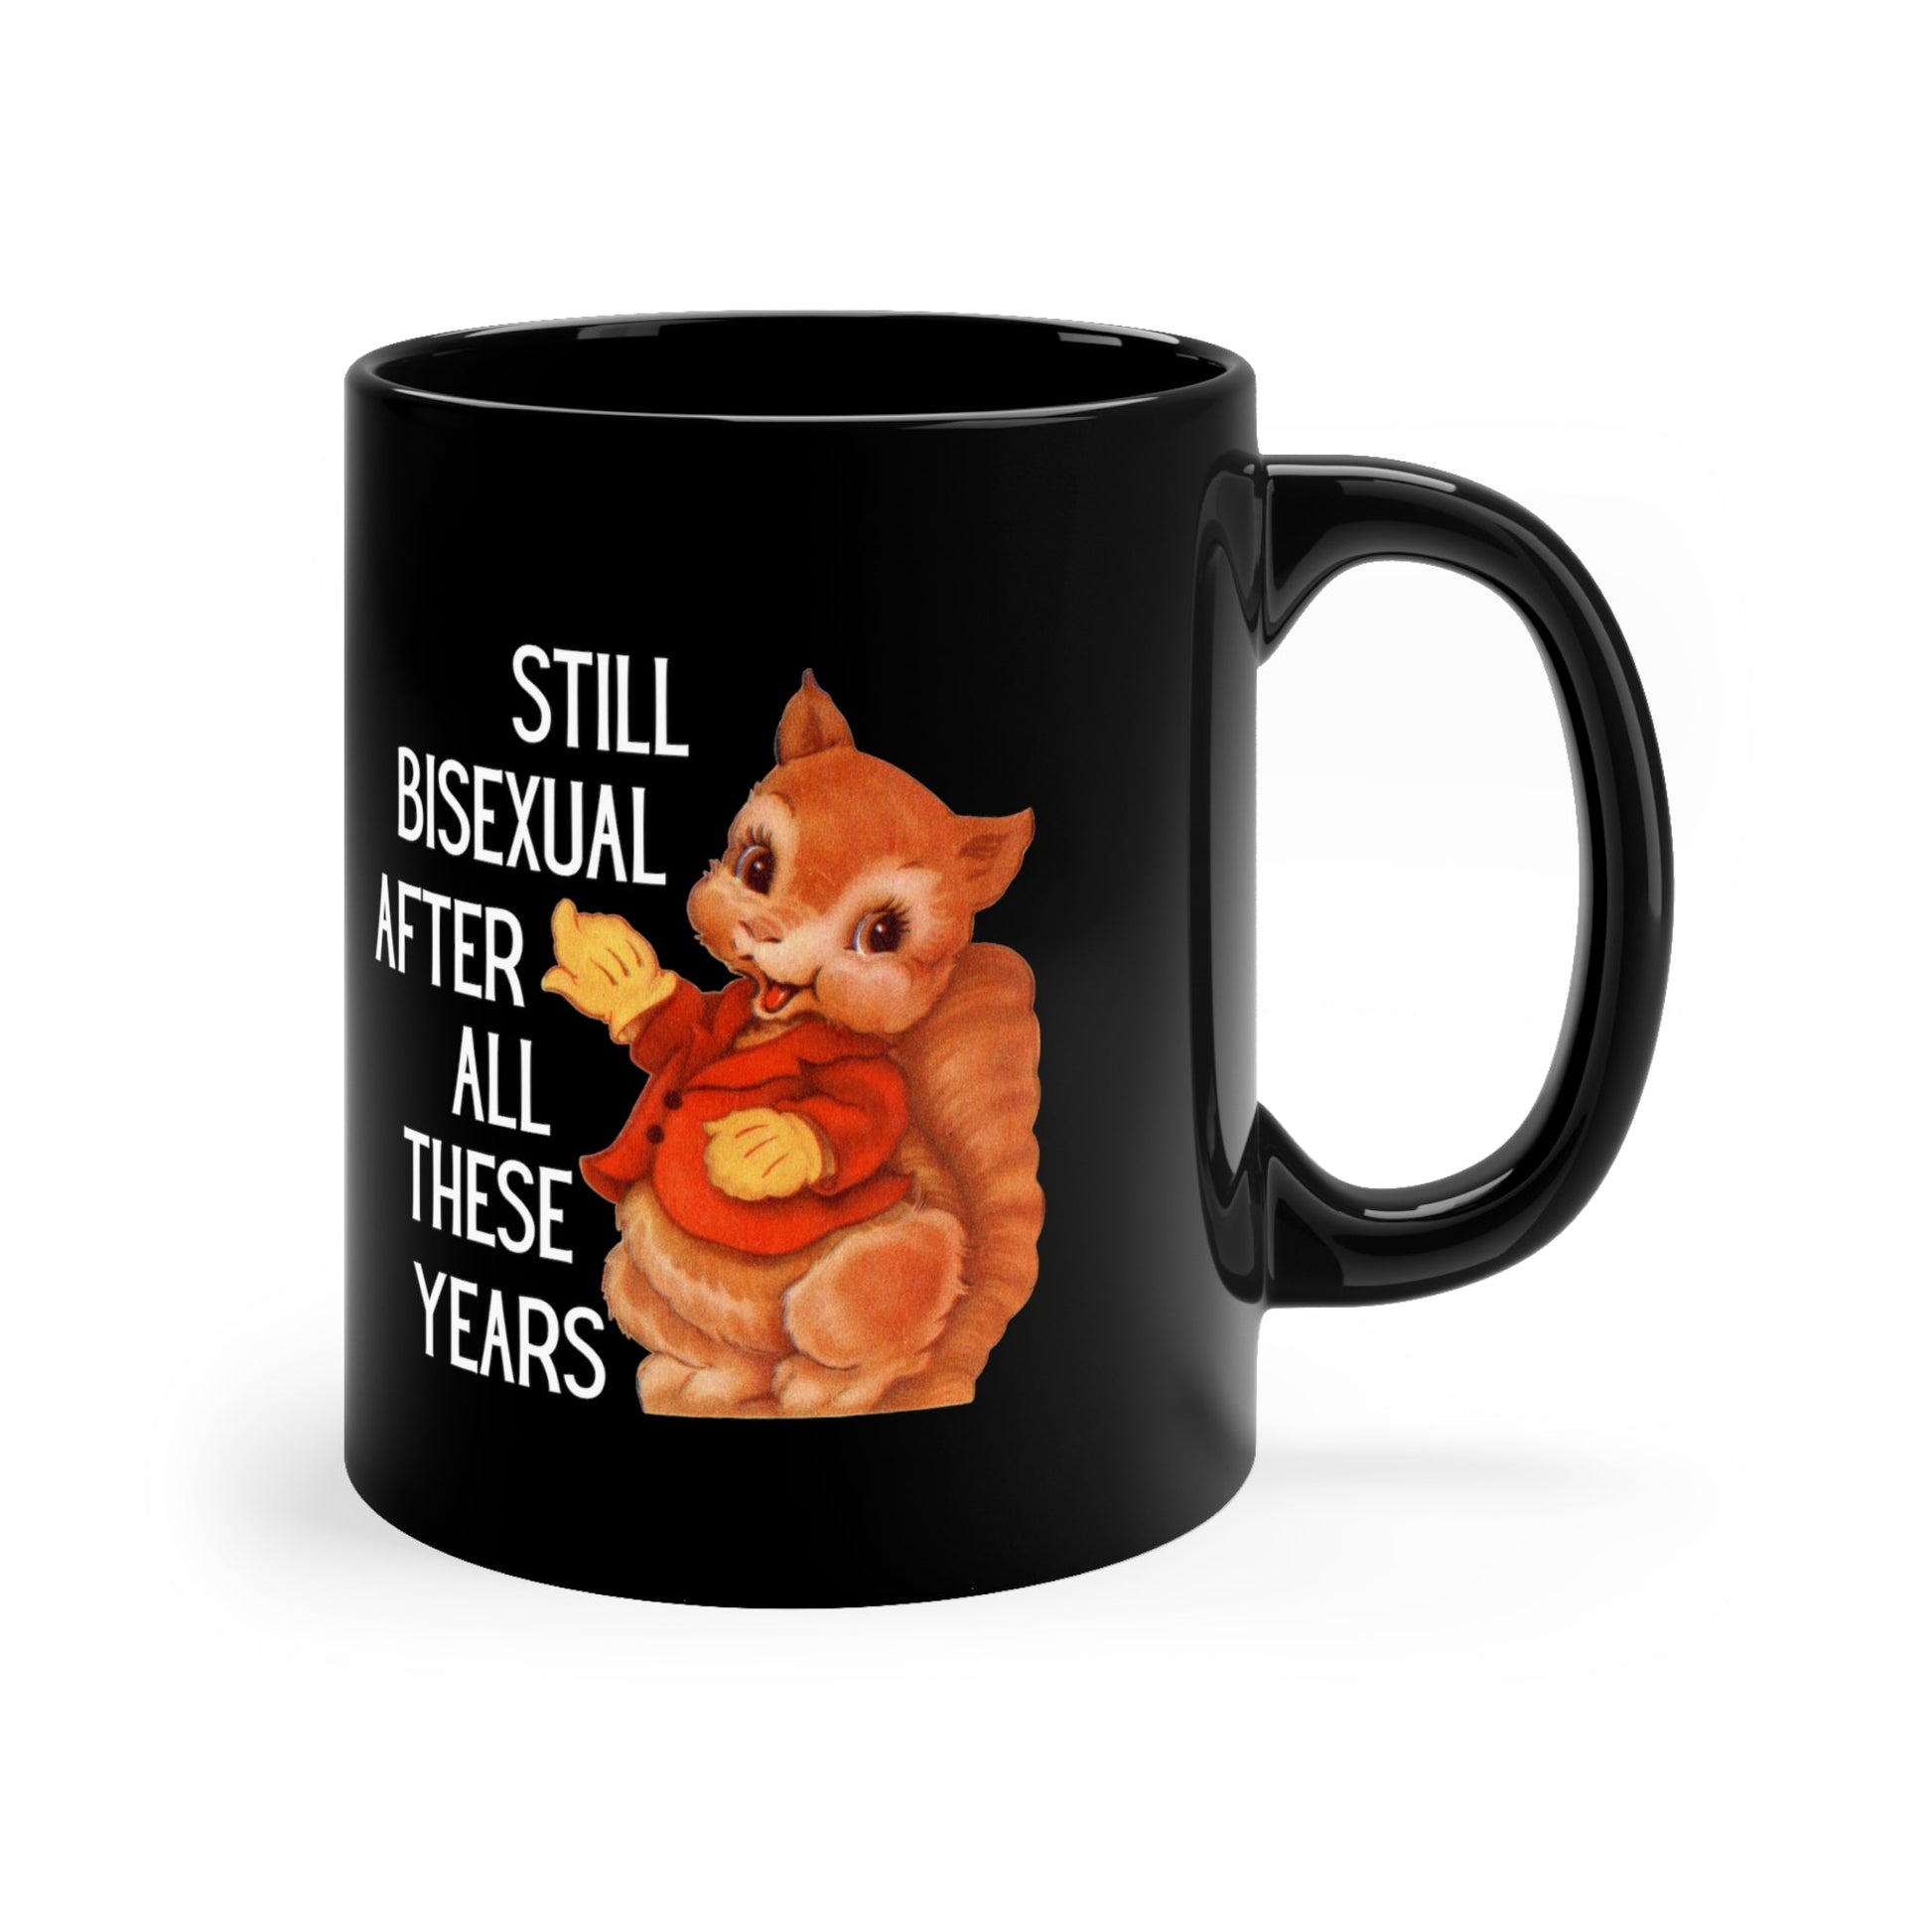 Still Bisexual After All These Years Black Mug